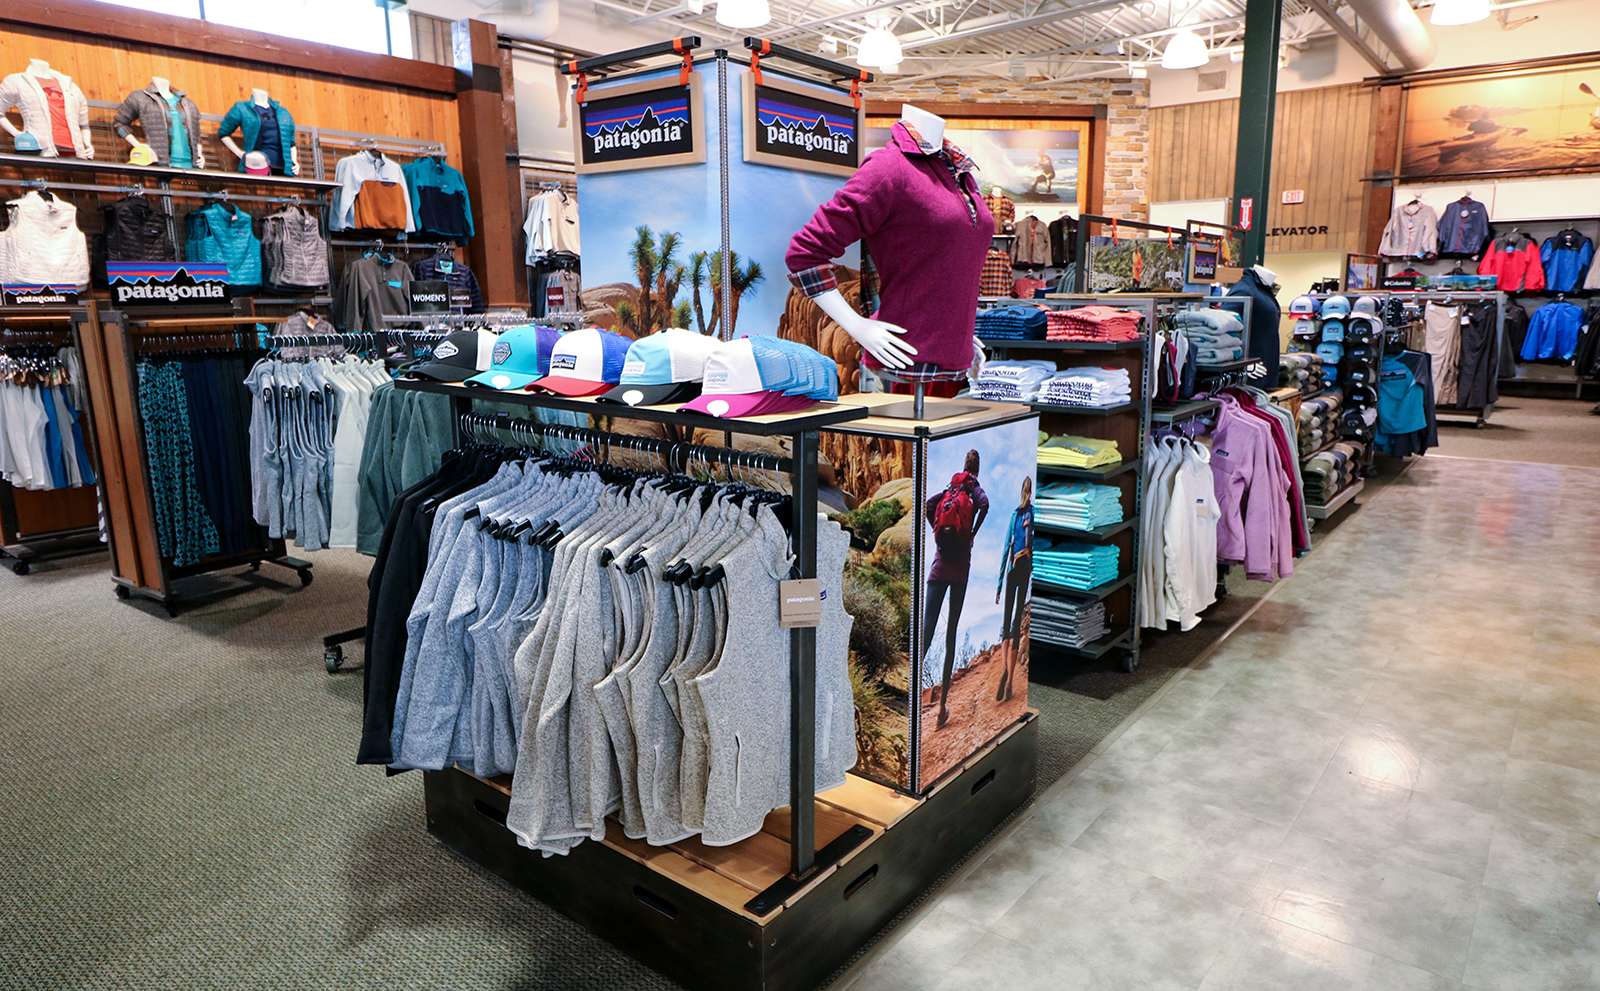 The final display designed for Patagonia by The Bernard Group, helping their products stand out in a department store environment.